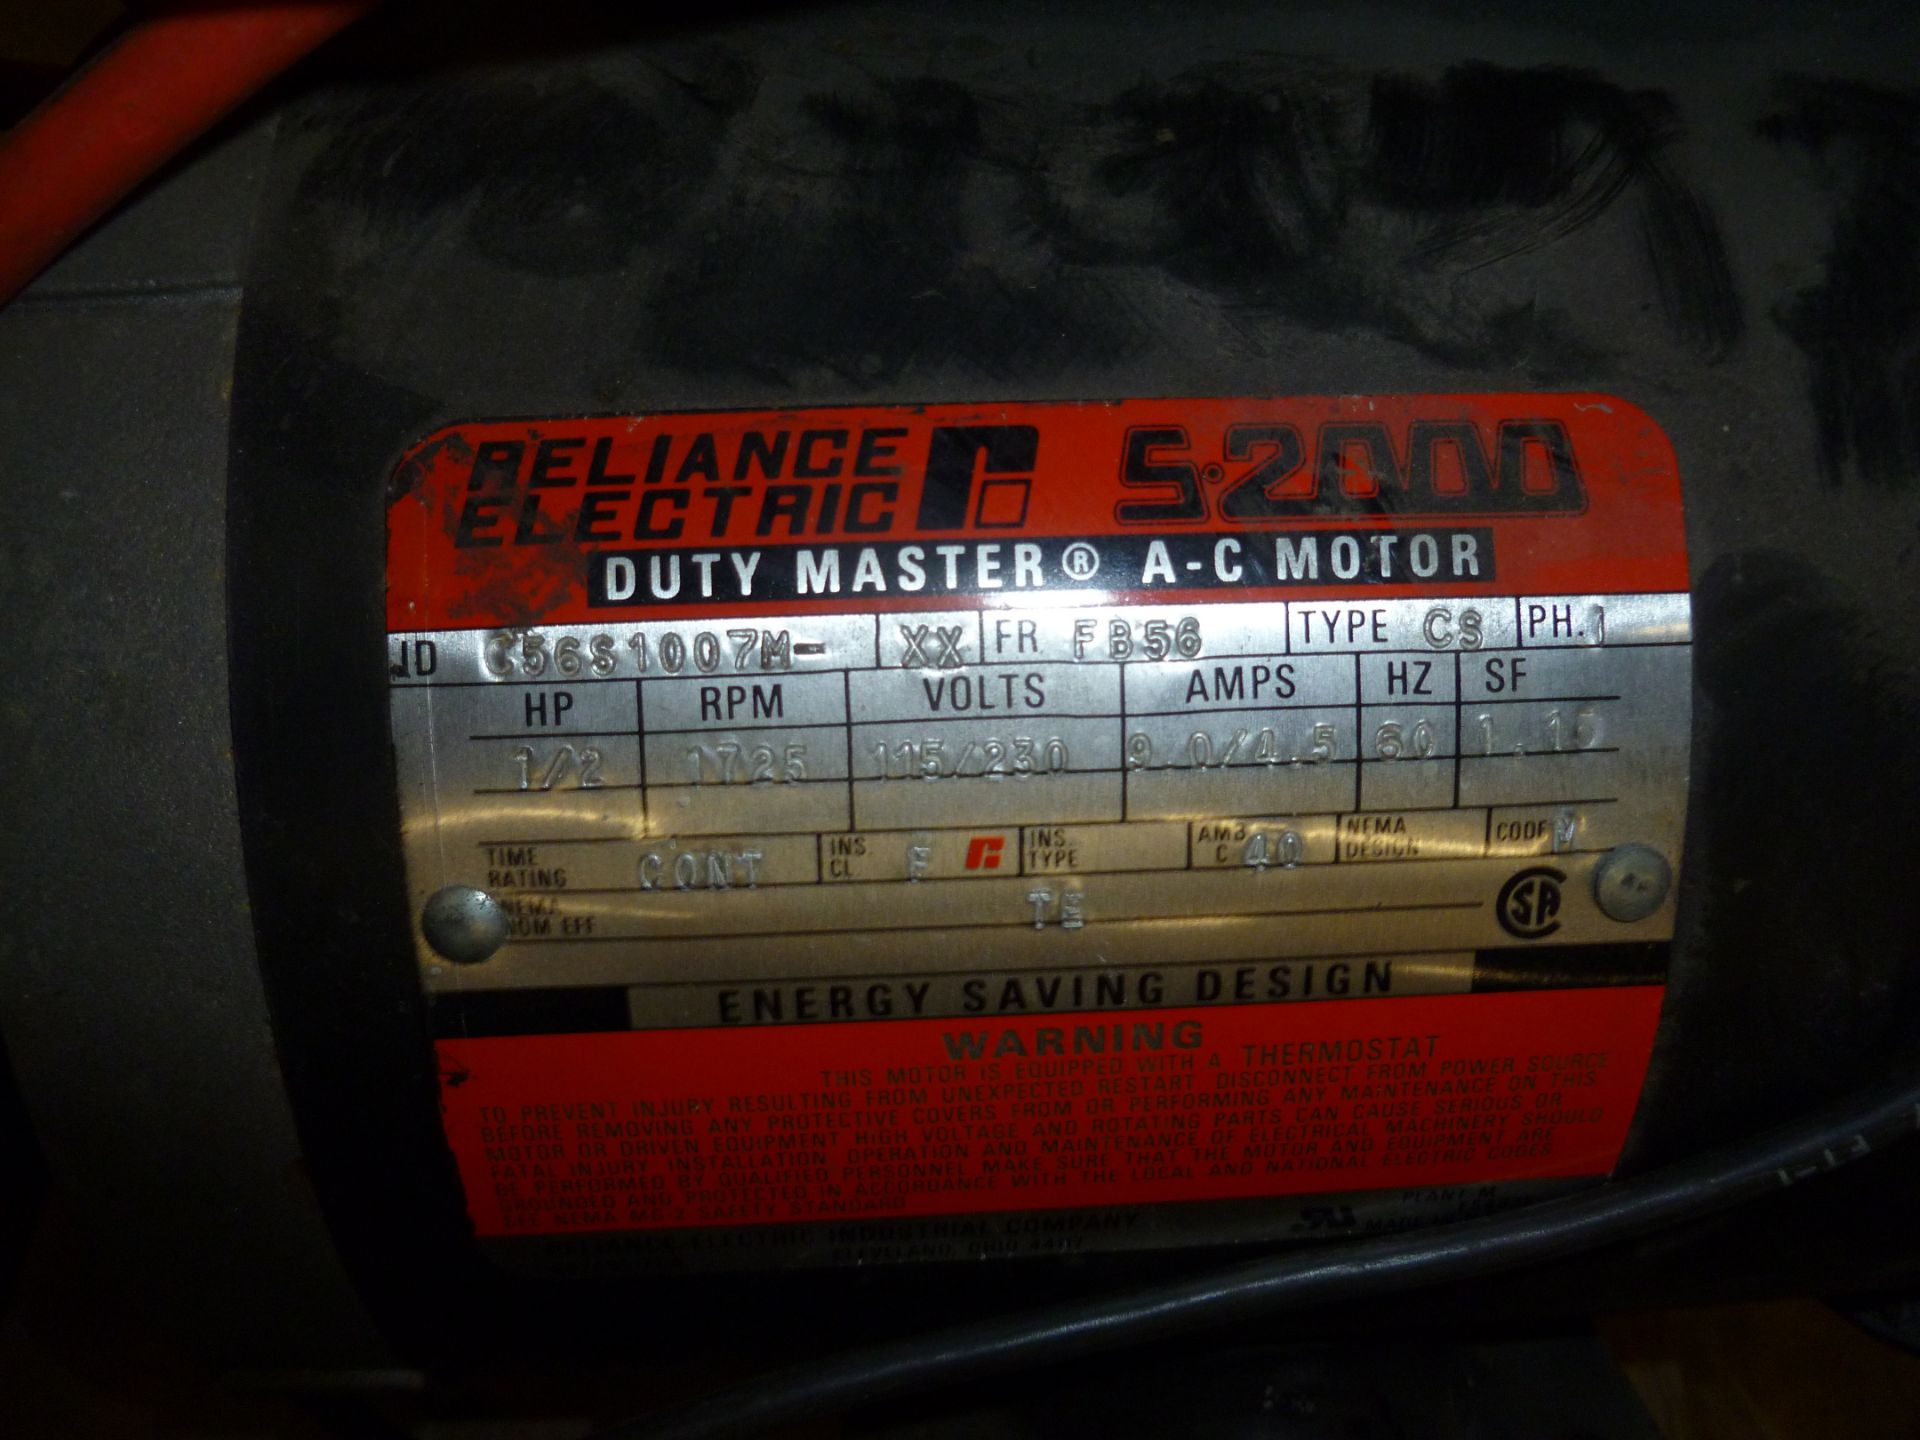 RELIANCE ELECTRIC C56S1007M-XX 1 PH 1/2 HP 1725 RPM 115/230 V DUTY MASTER A-C MOTOR TESTED AND - Image 6 of 6